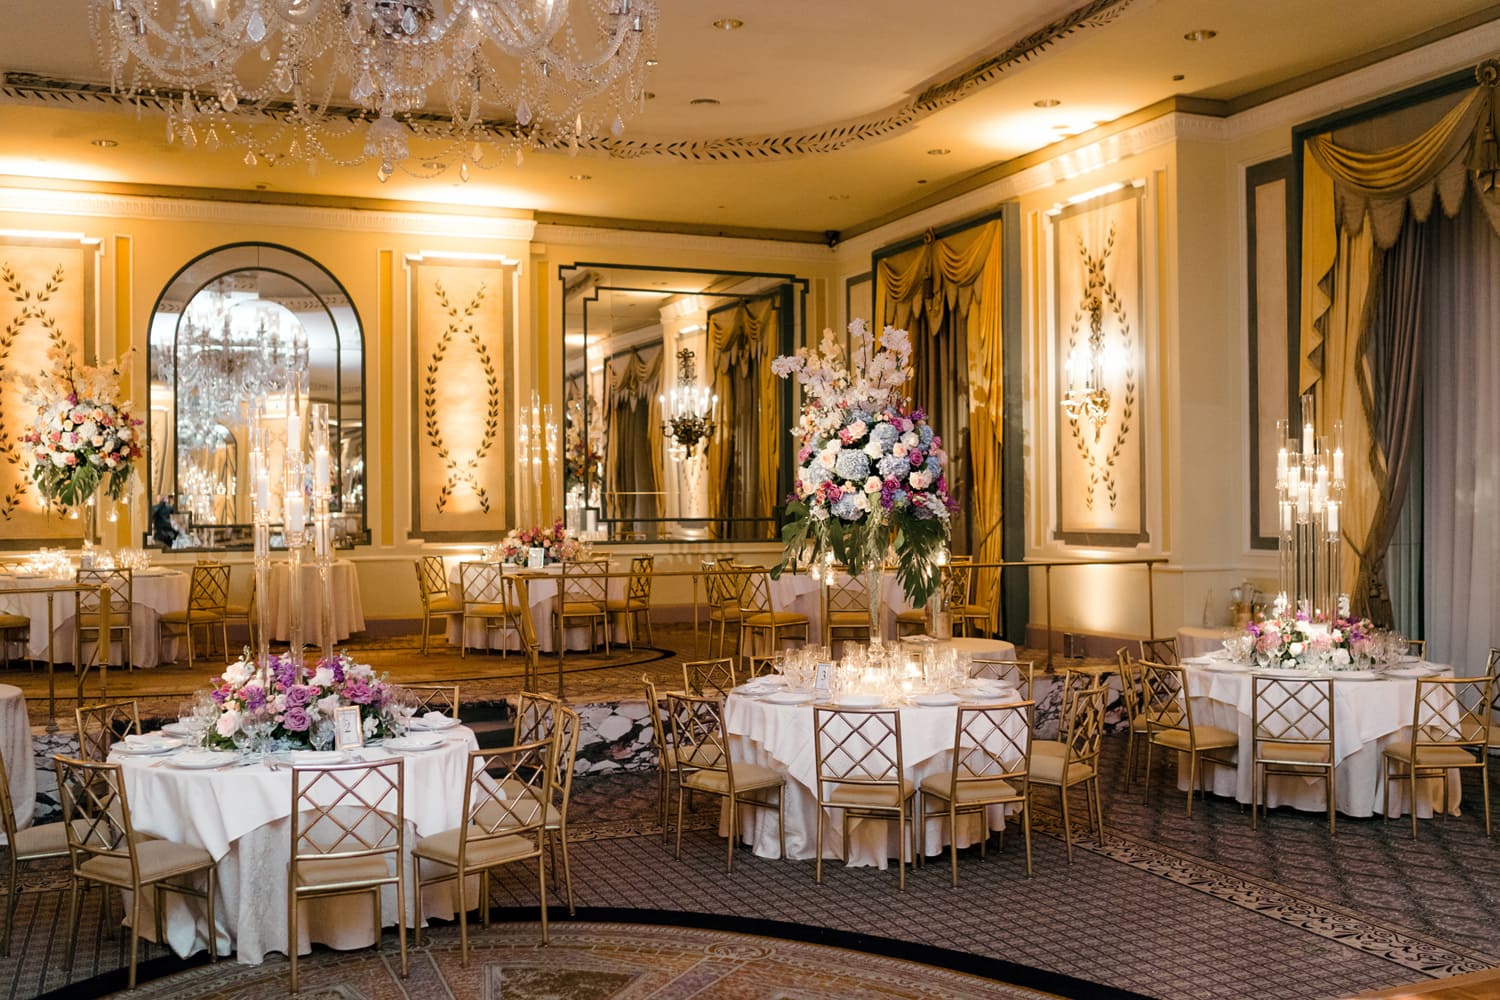 A wedding reception setting at The Pierre Hotel in New York